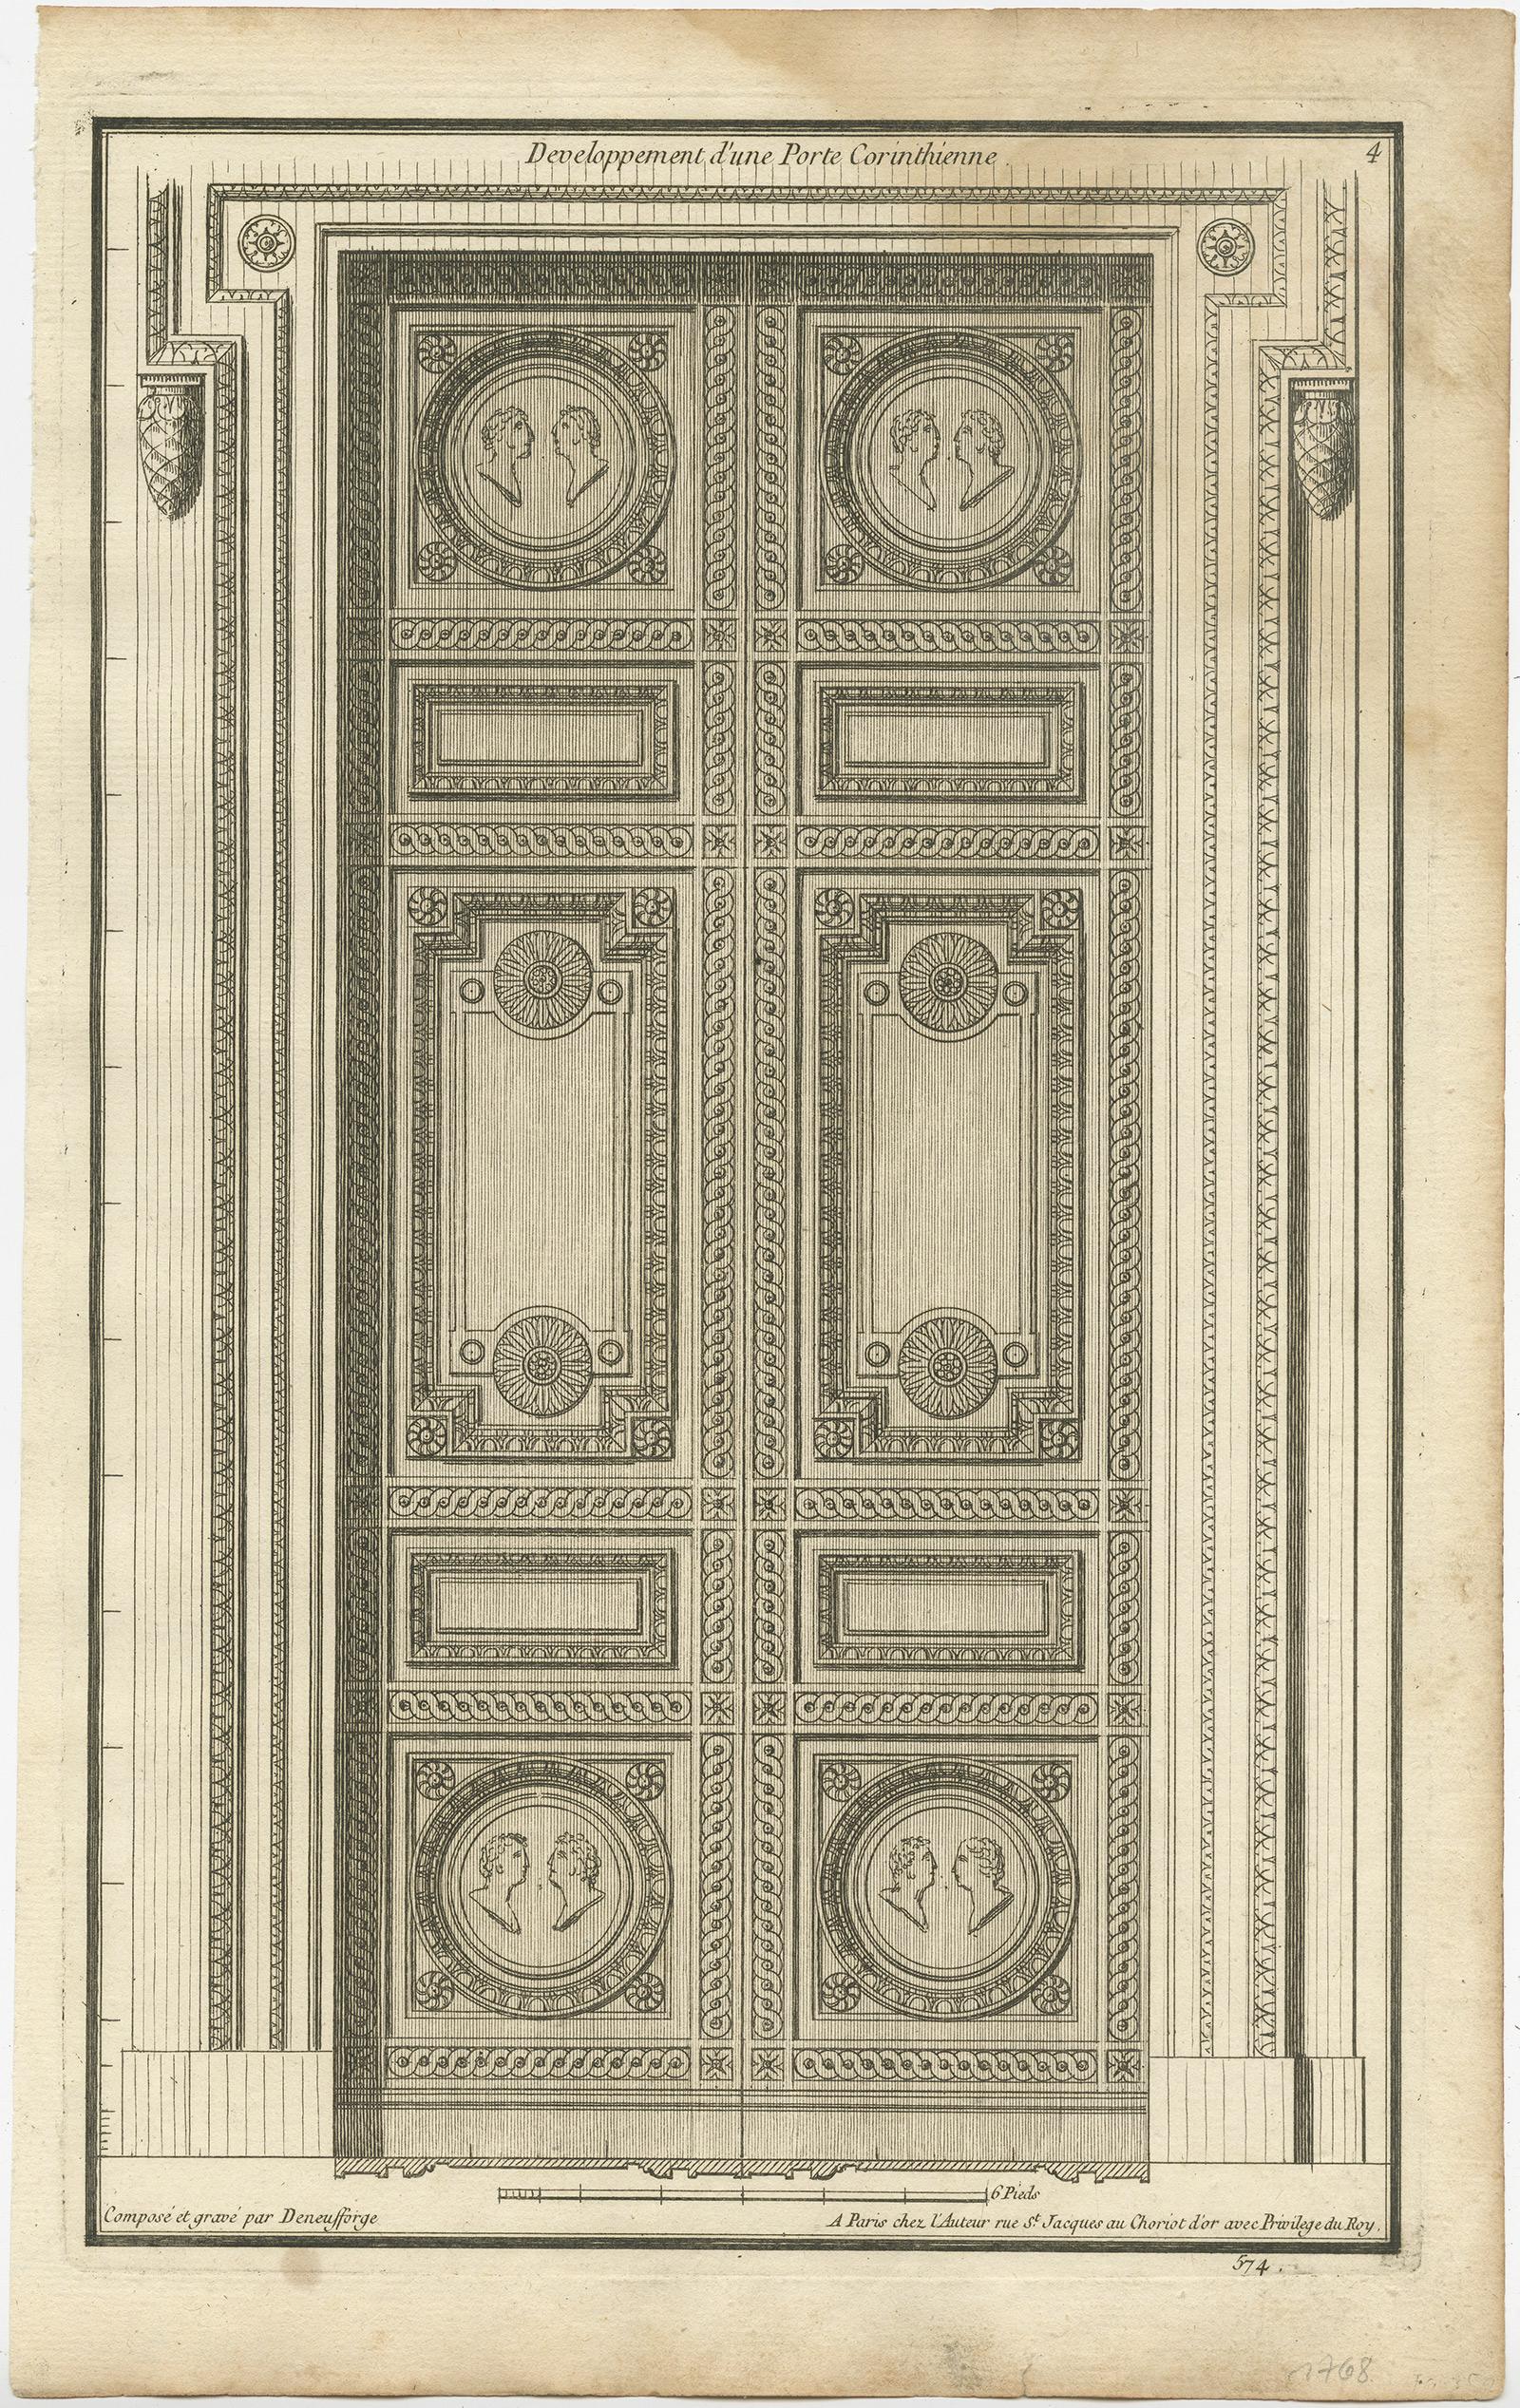 Set of two architecture prints depicting the design of an Ionic and Corinthian portico. These prints originate from 'Recueil Élémentaire d’Architecture' by Jean-Francois de Neufforge. A comprehensive series of architectural studies of facades,